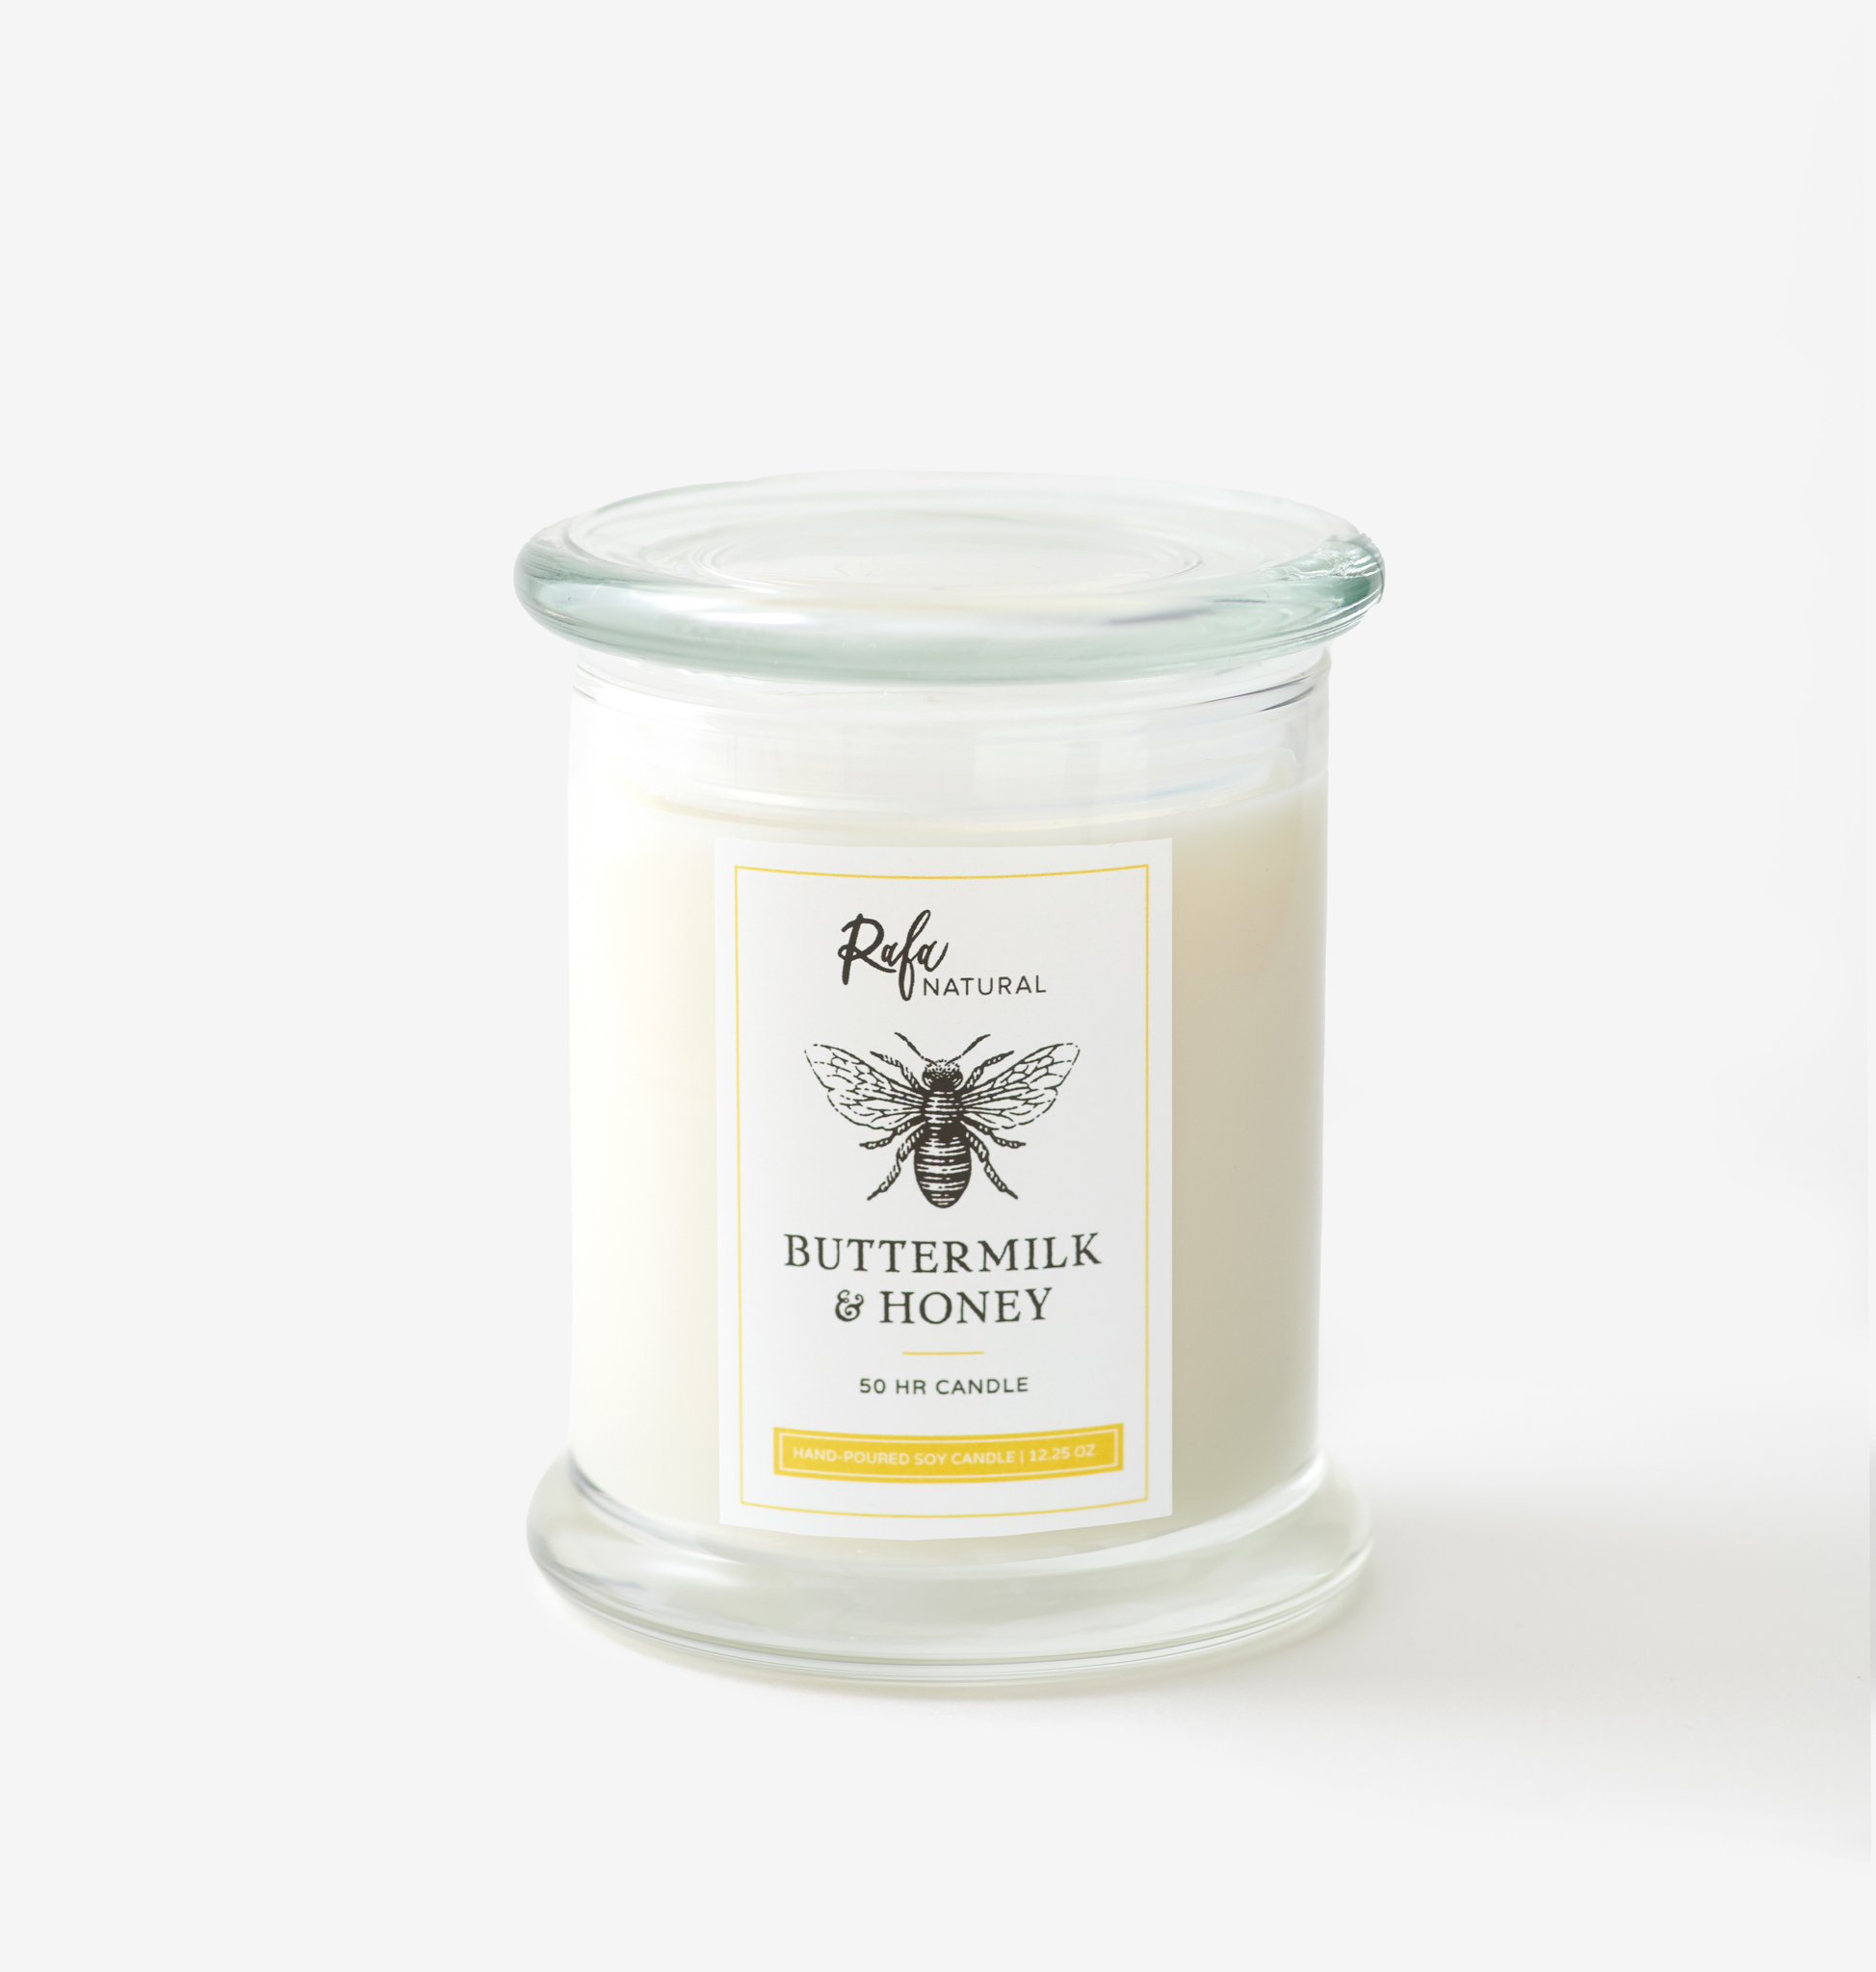 Buttermilk and Honey 50Hr Soy Candle by Rafa Natural